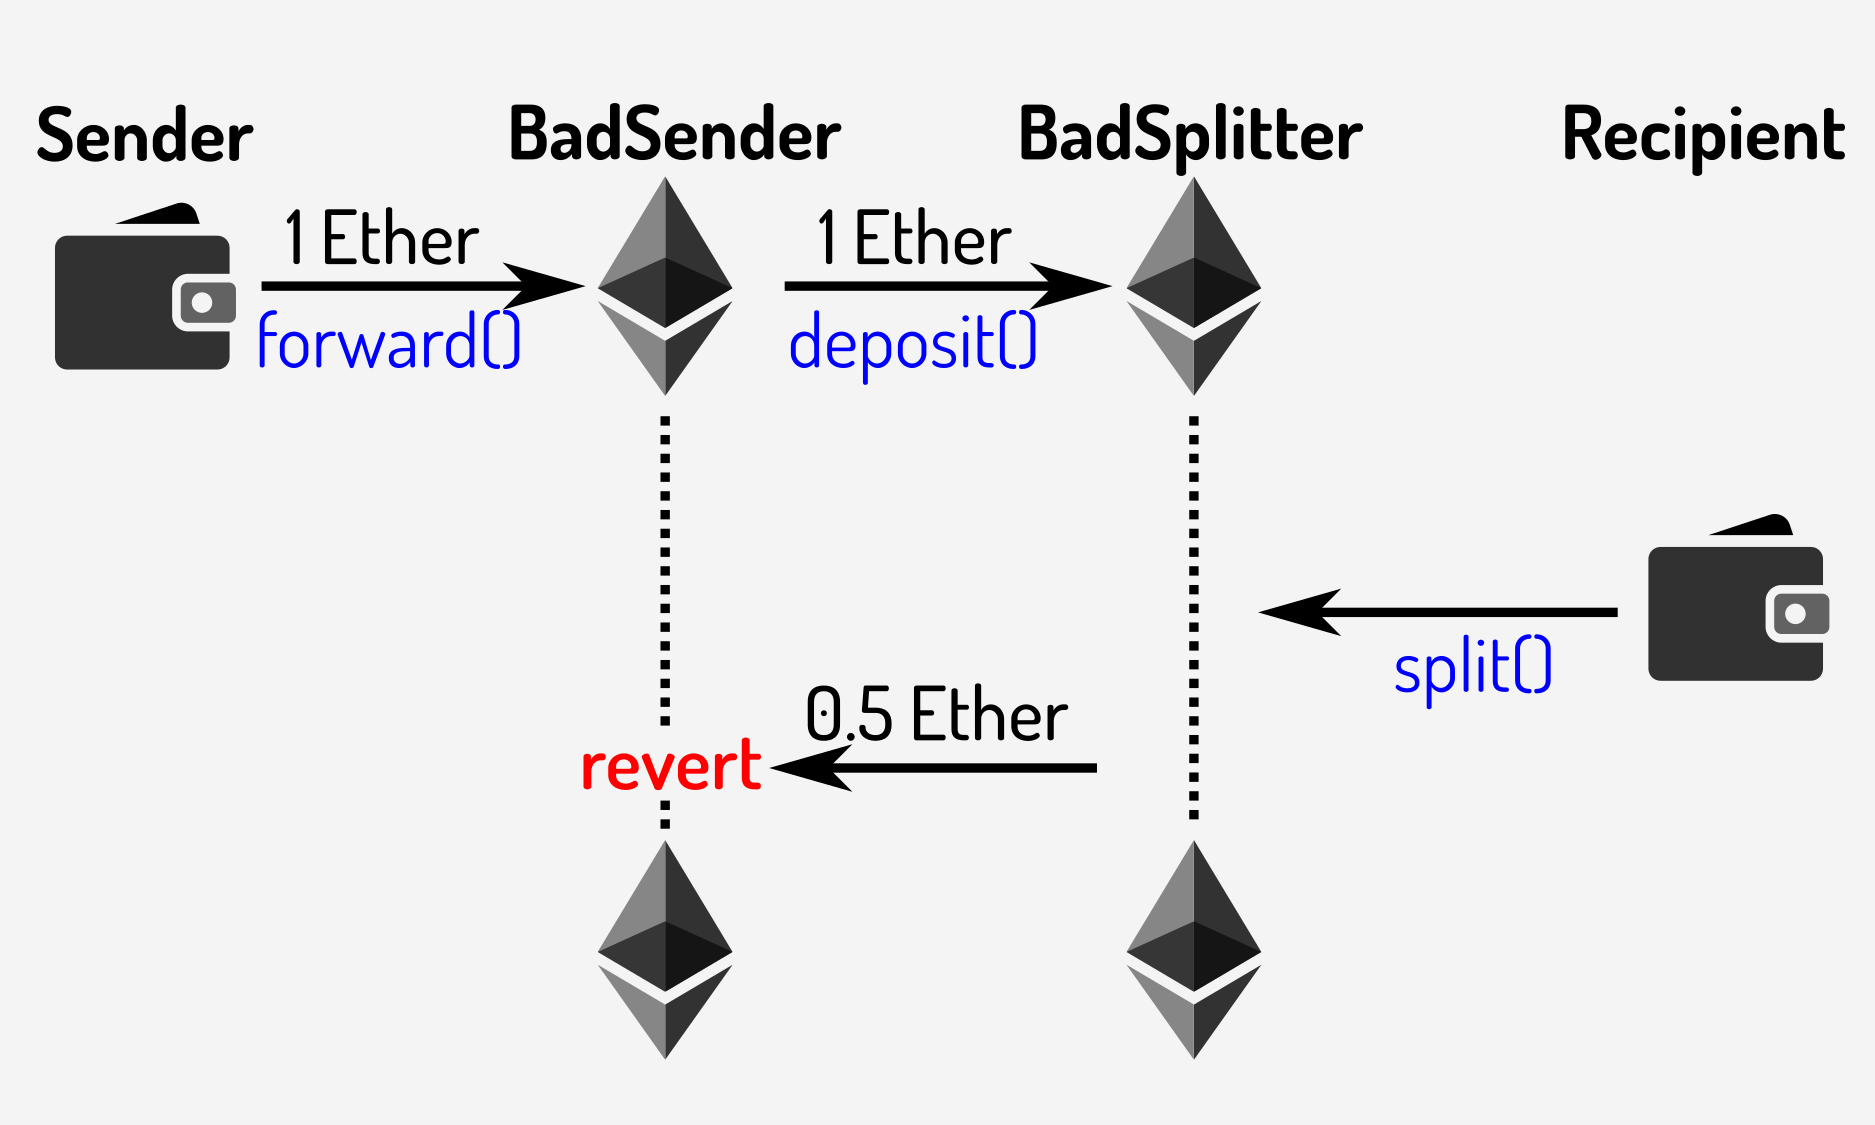 Operation of the BadSplitter contract with a malicious sender